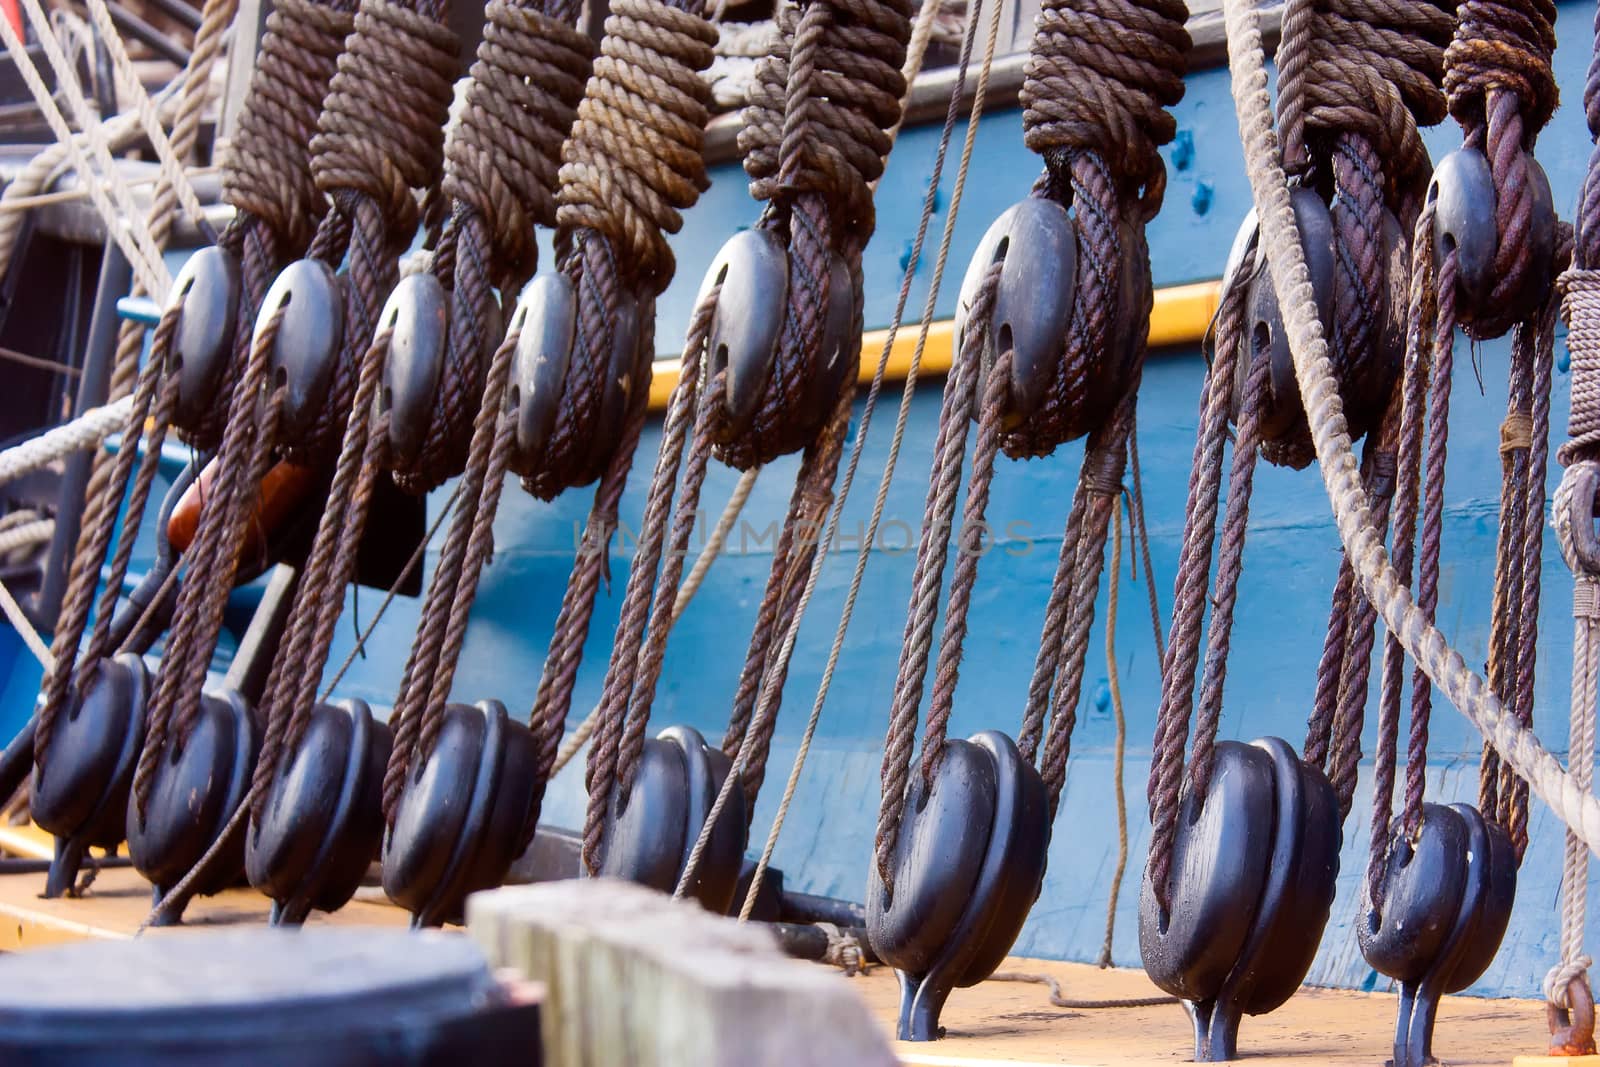 Close up shot of pulley blocks and rigging on an old sailing ship